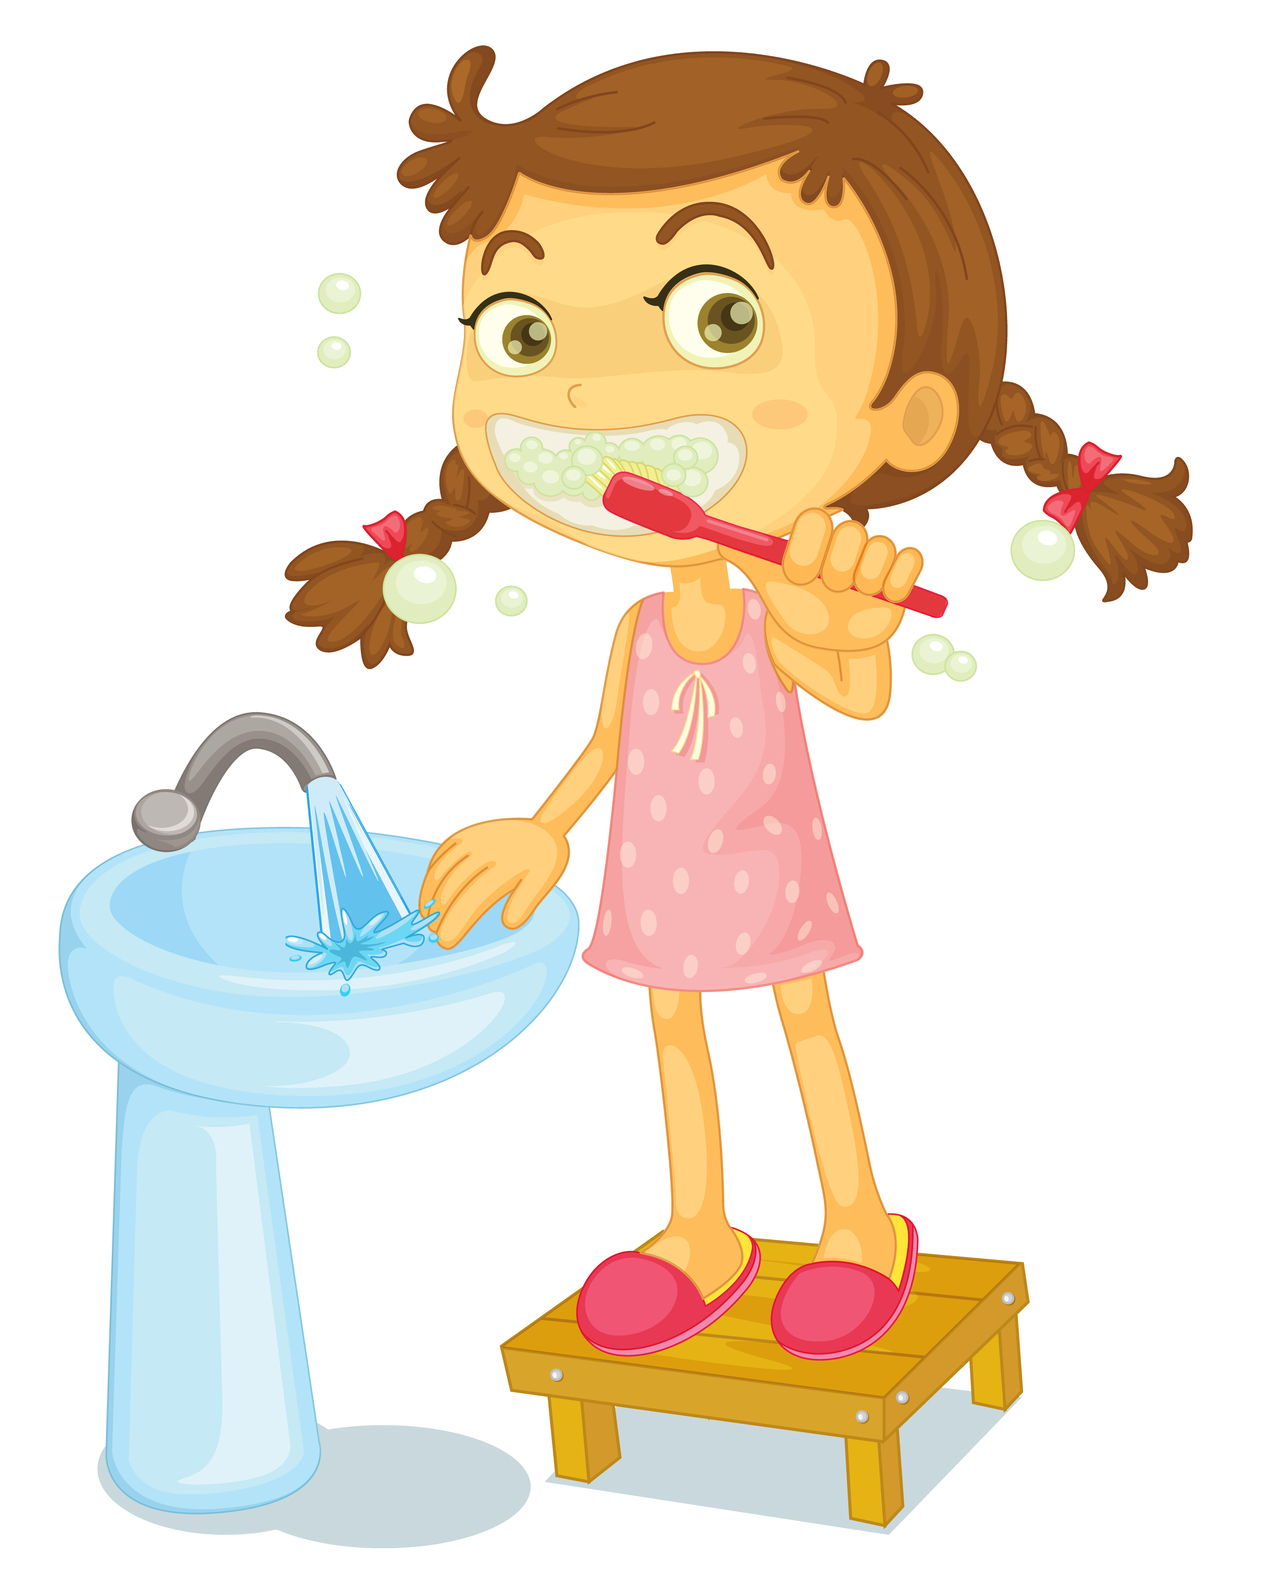 Brushing Your Teeth Properly - Kidtastic Dental